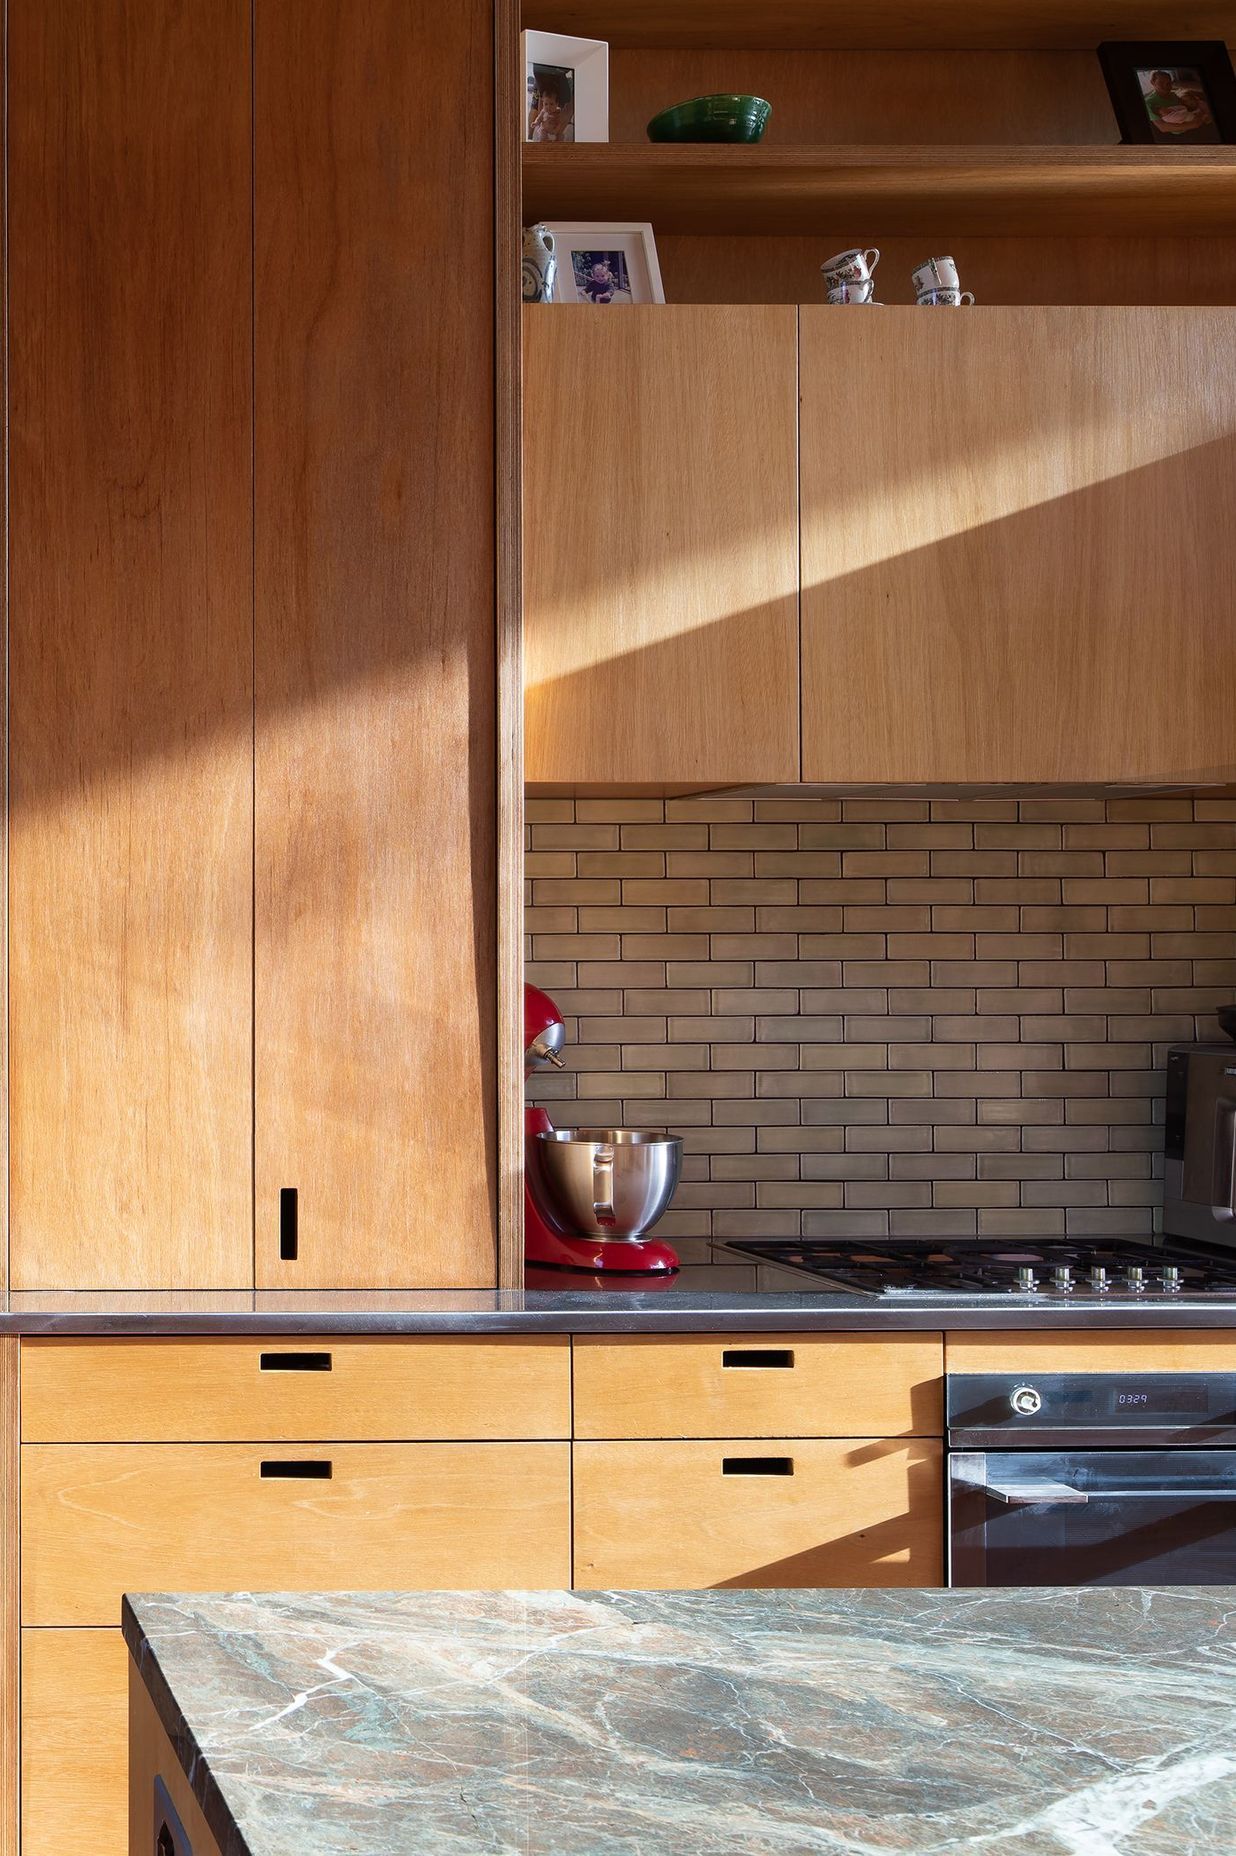 A close-up of the kitchen reveals the bespoke locally built plywood cabinetry.